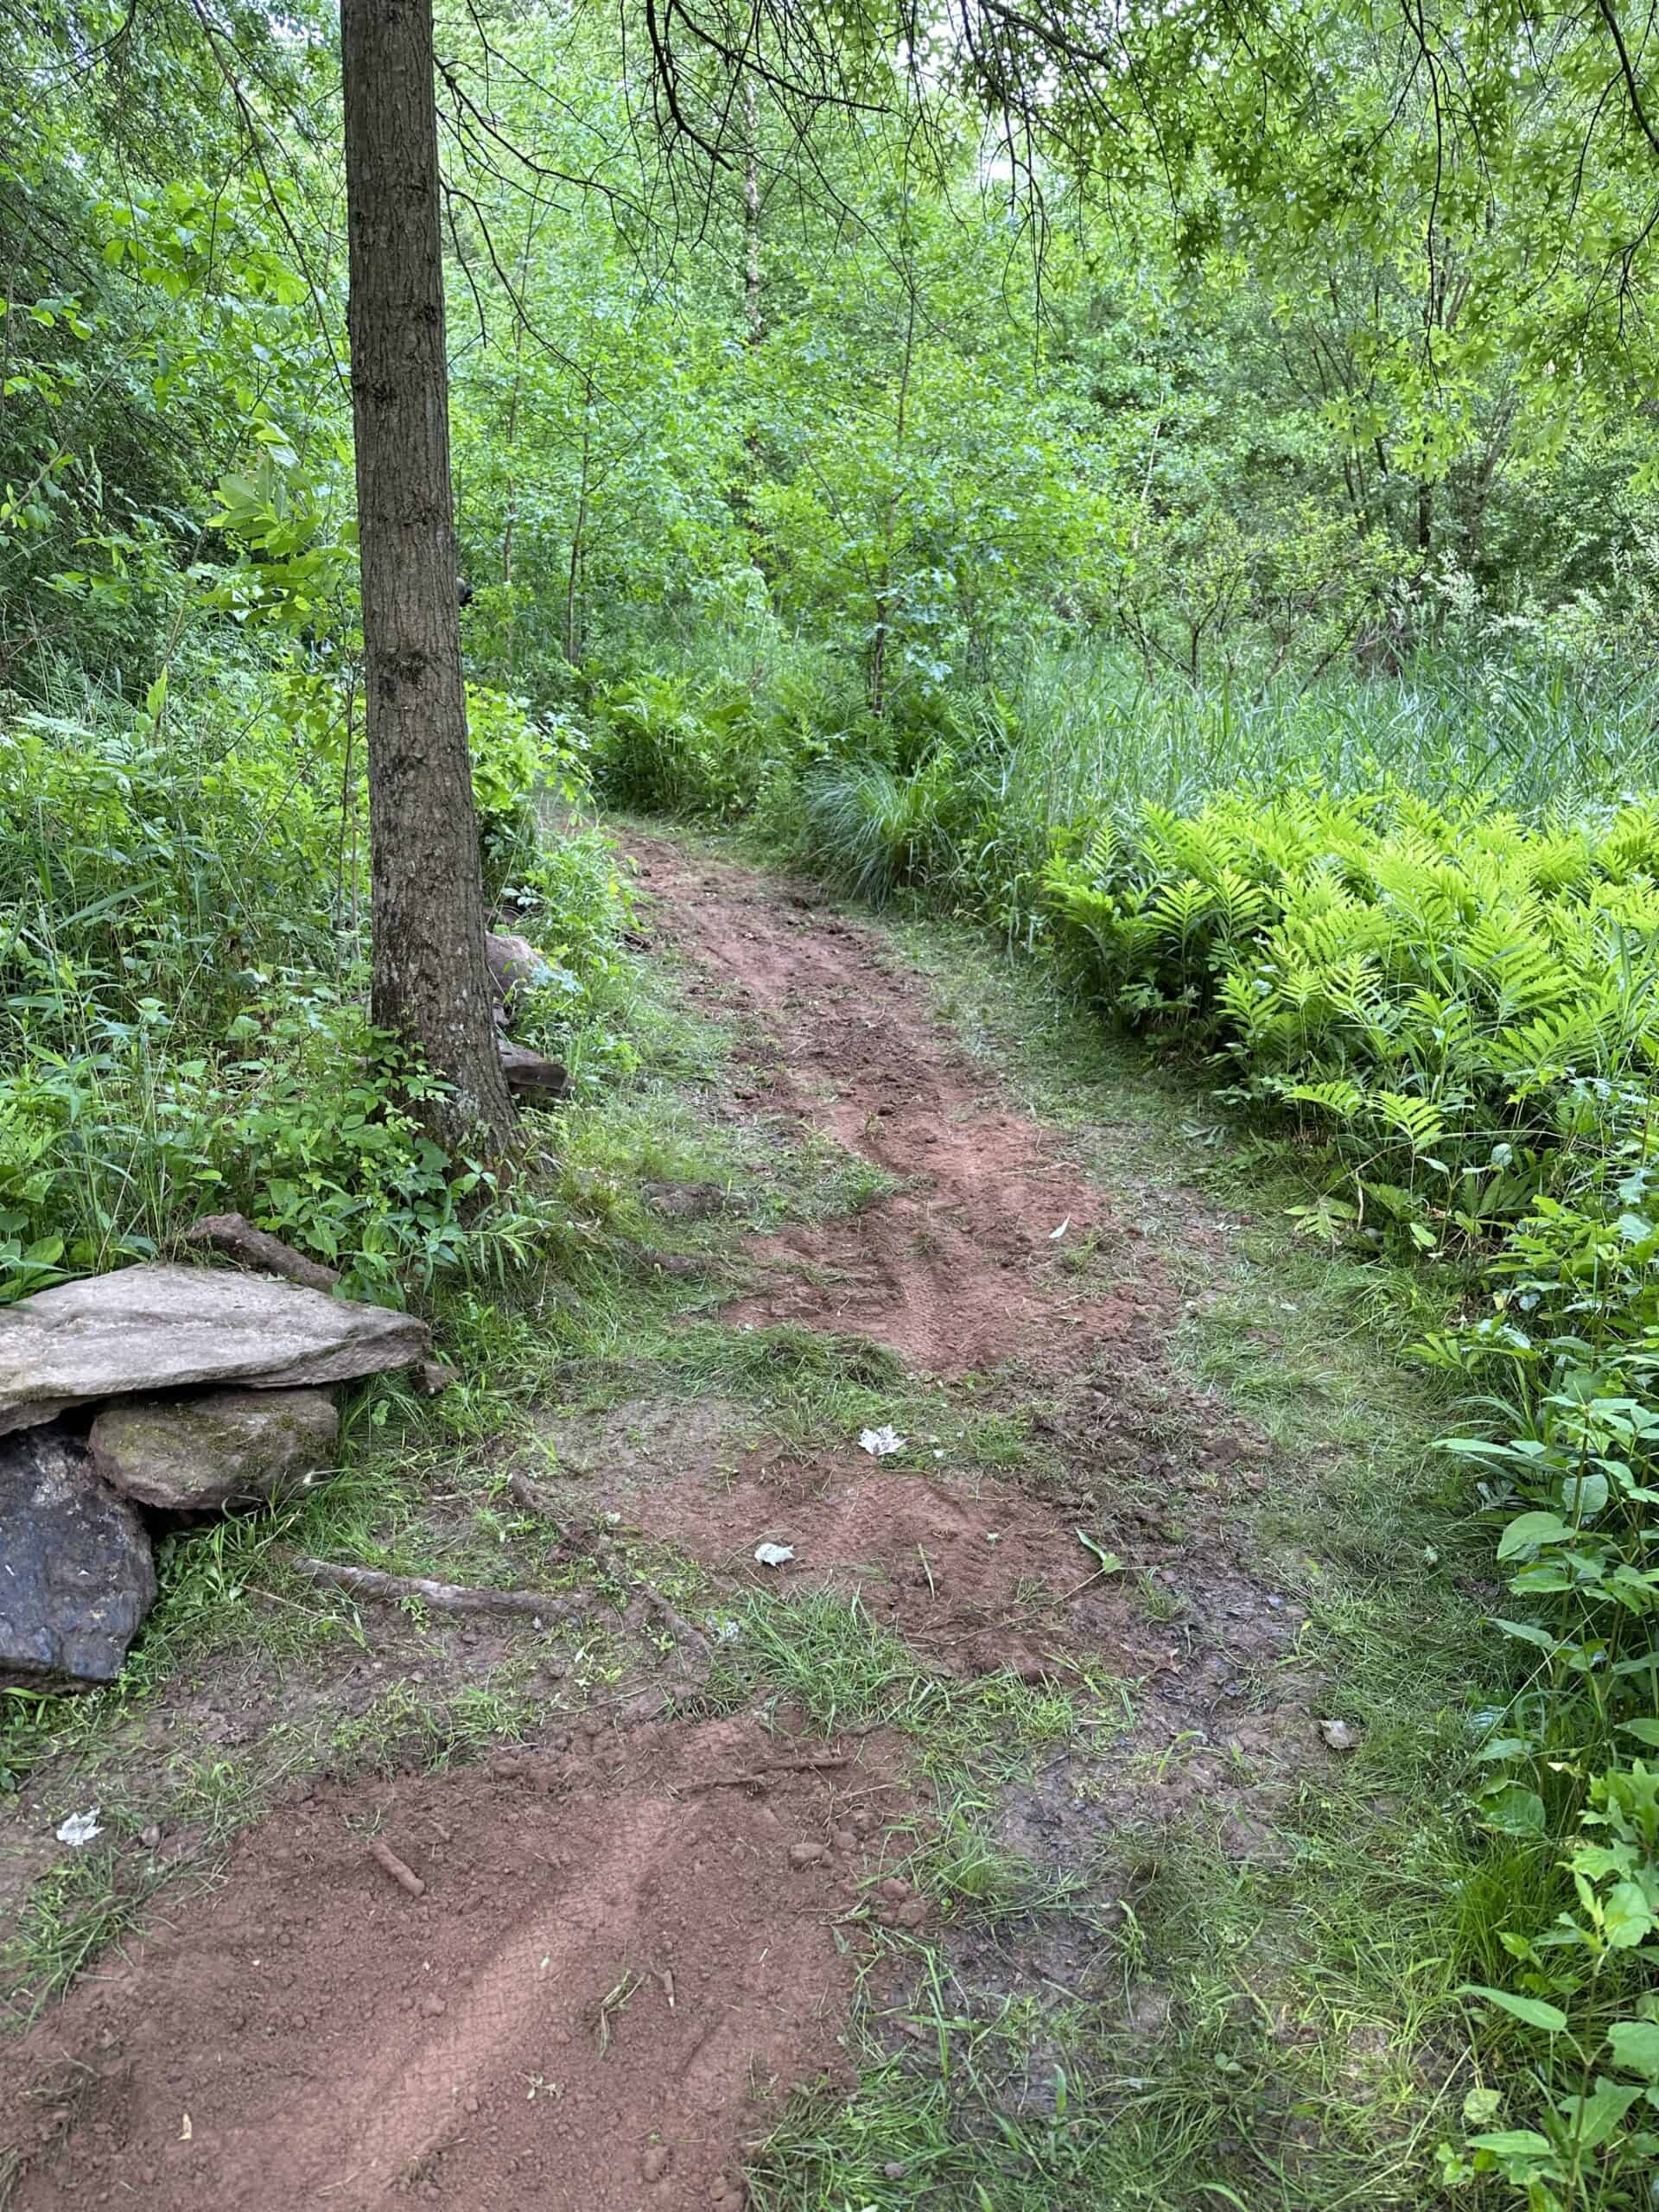 Dirt subsurface of wooded trail being improved with gravel